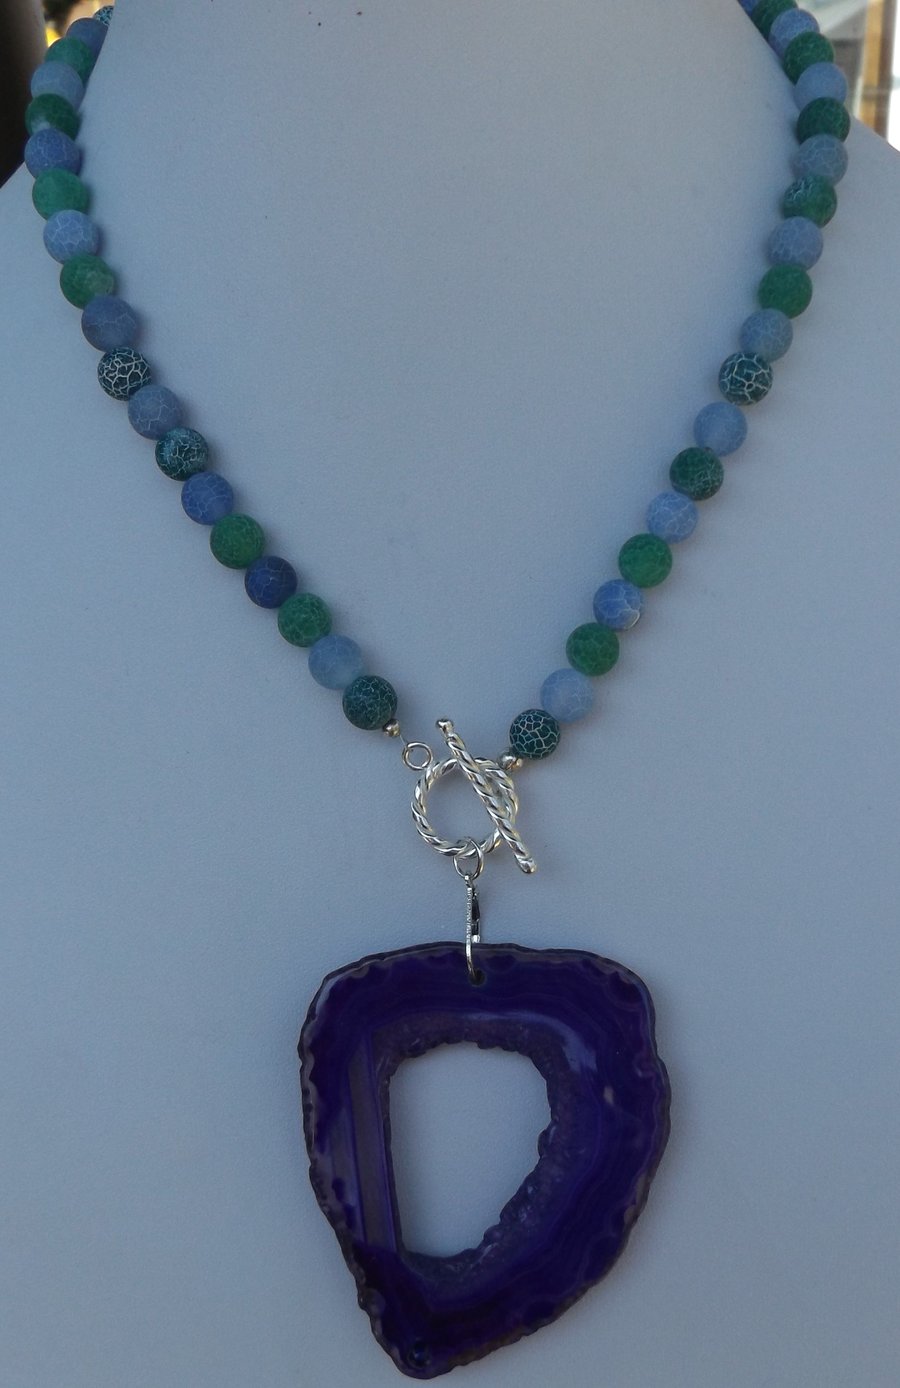 Agate necklace with purple agate slice pendant